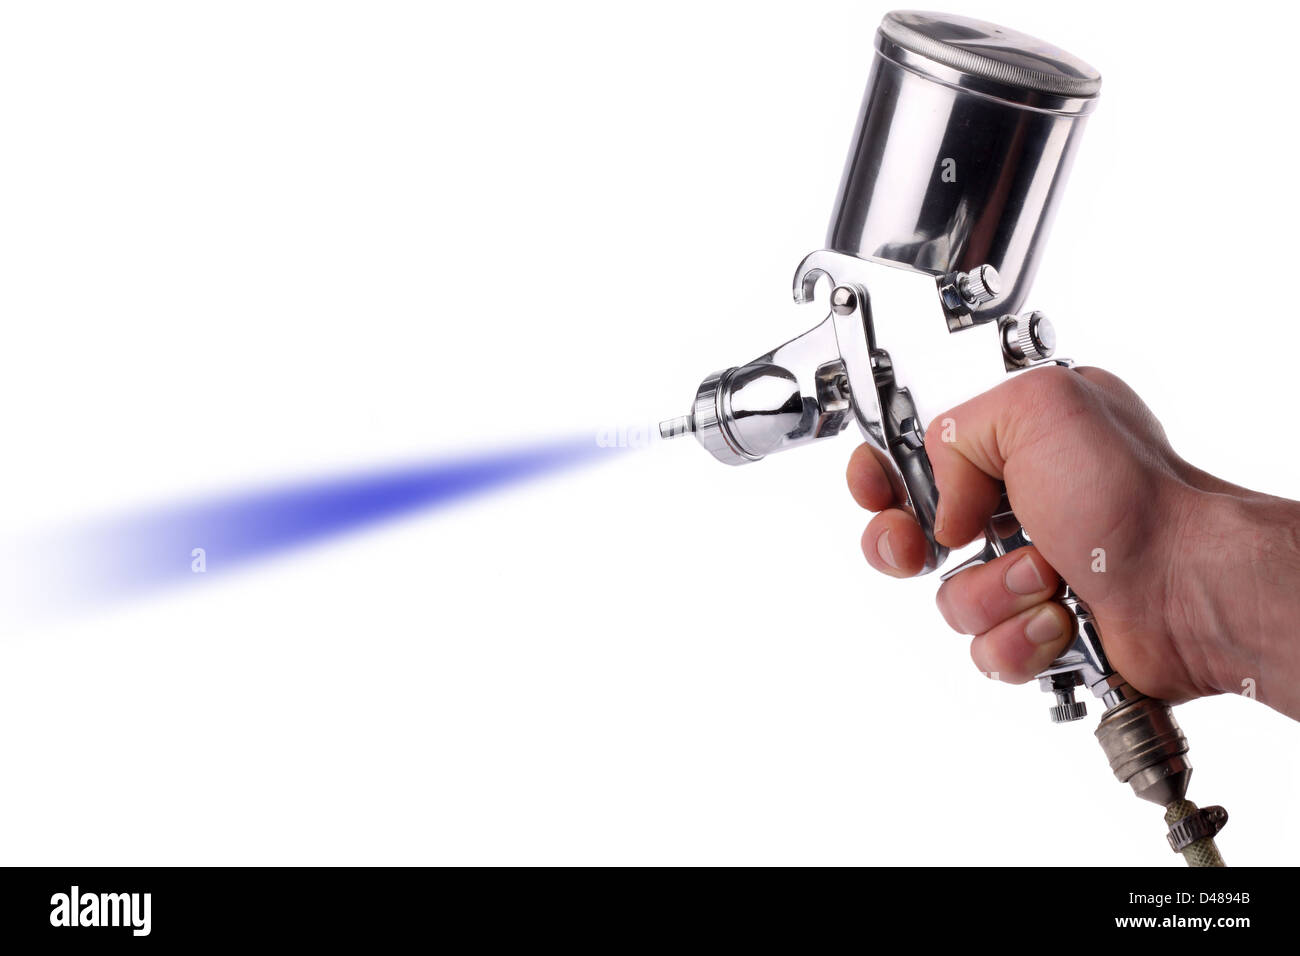 A hand with a spray gun at work. Stock Photo